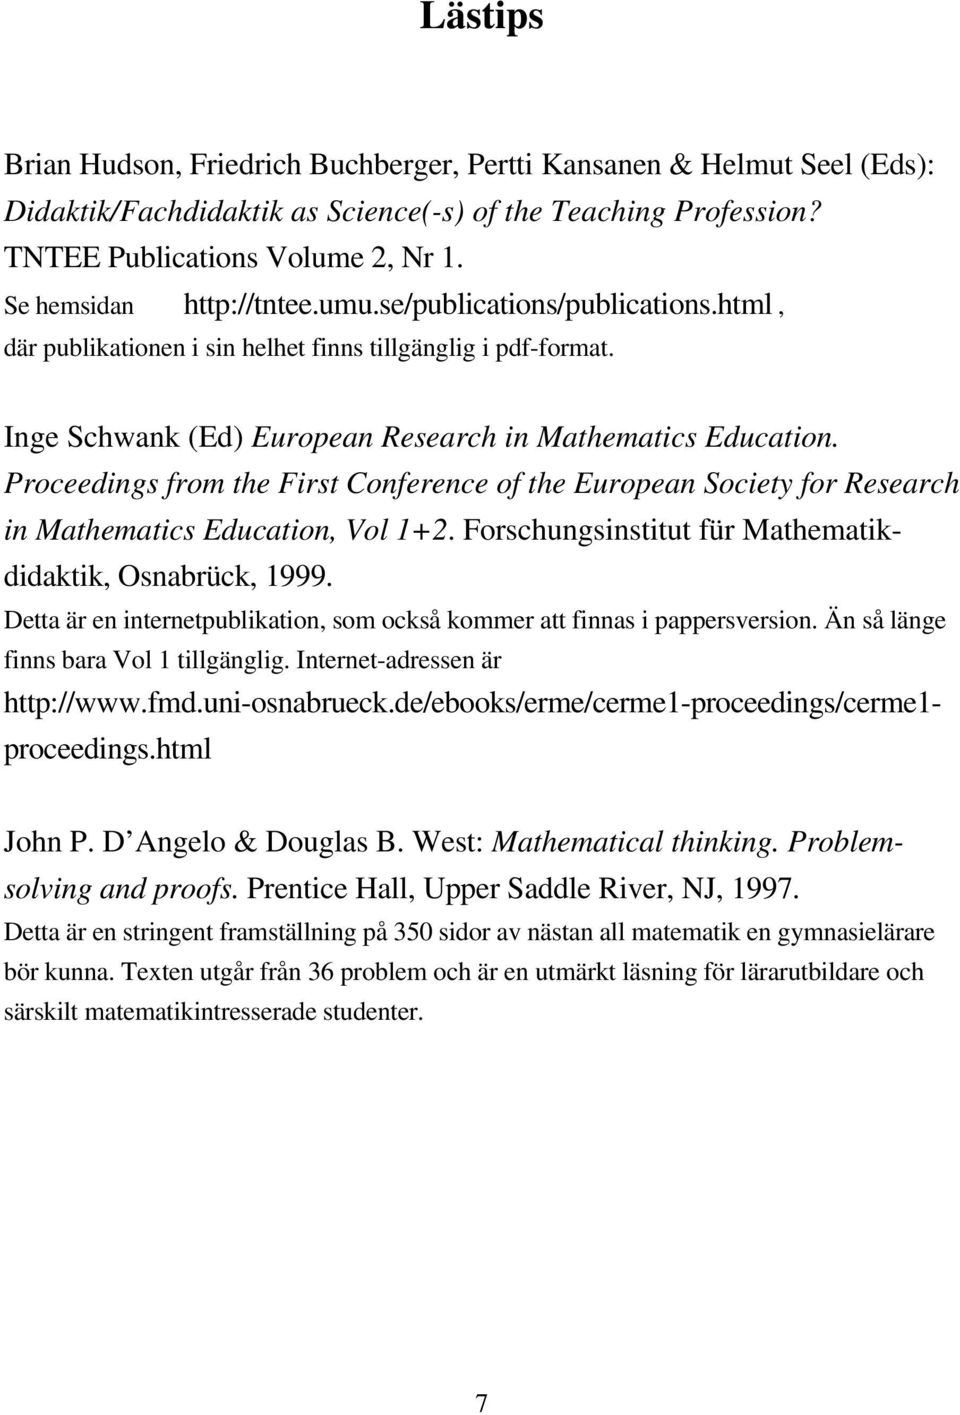 Proceedings from the First Conference of the European Society for Research in Mathematics Education, Vol 1+2. Forschungsinstitut für Mathematikdidaktik, Osnabrück, 1999.